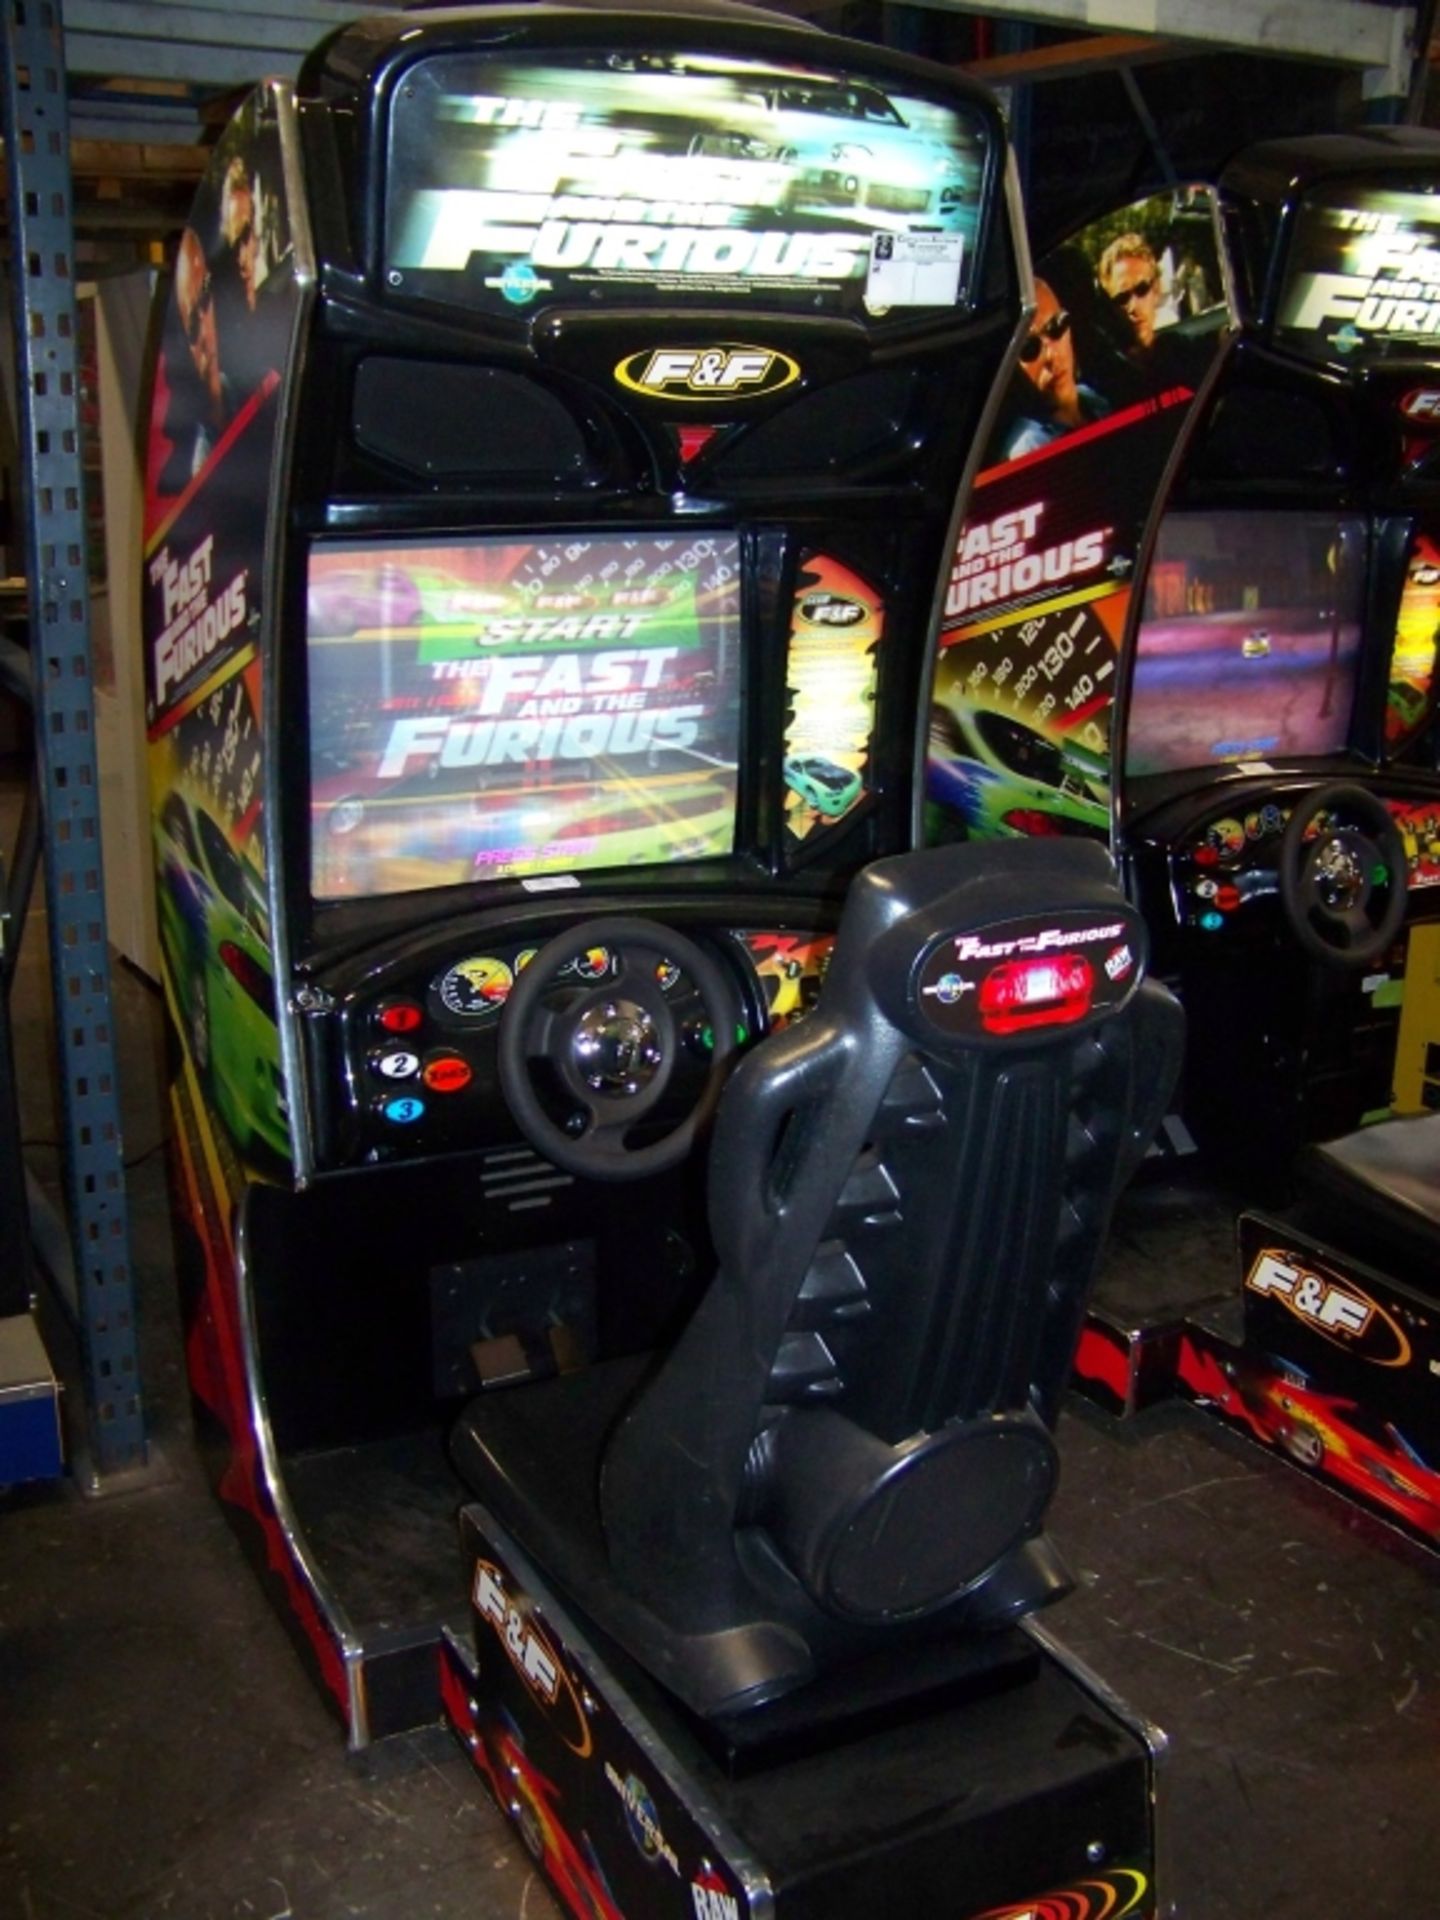 FAST AND FURIOUS RACING DRIVER ARCADE GAME Item is in used condition. Evidence of wear and